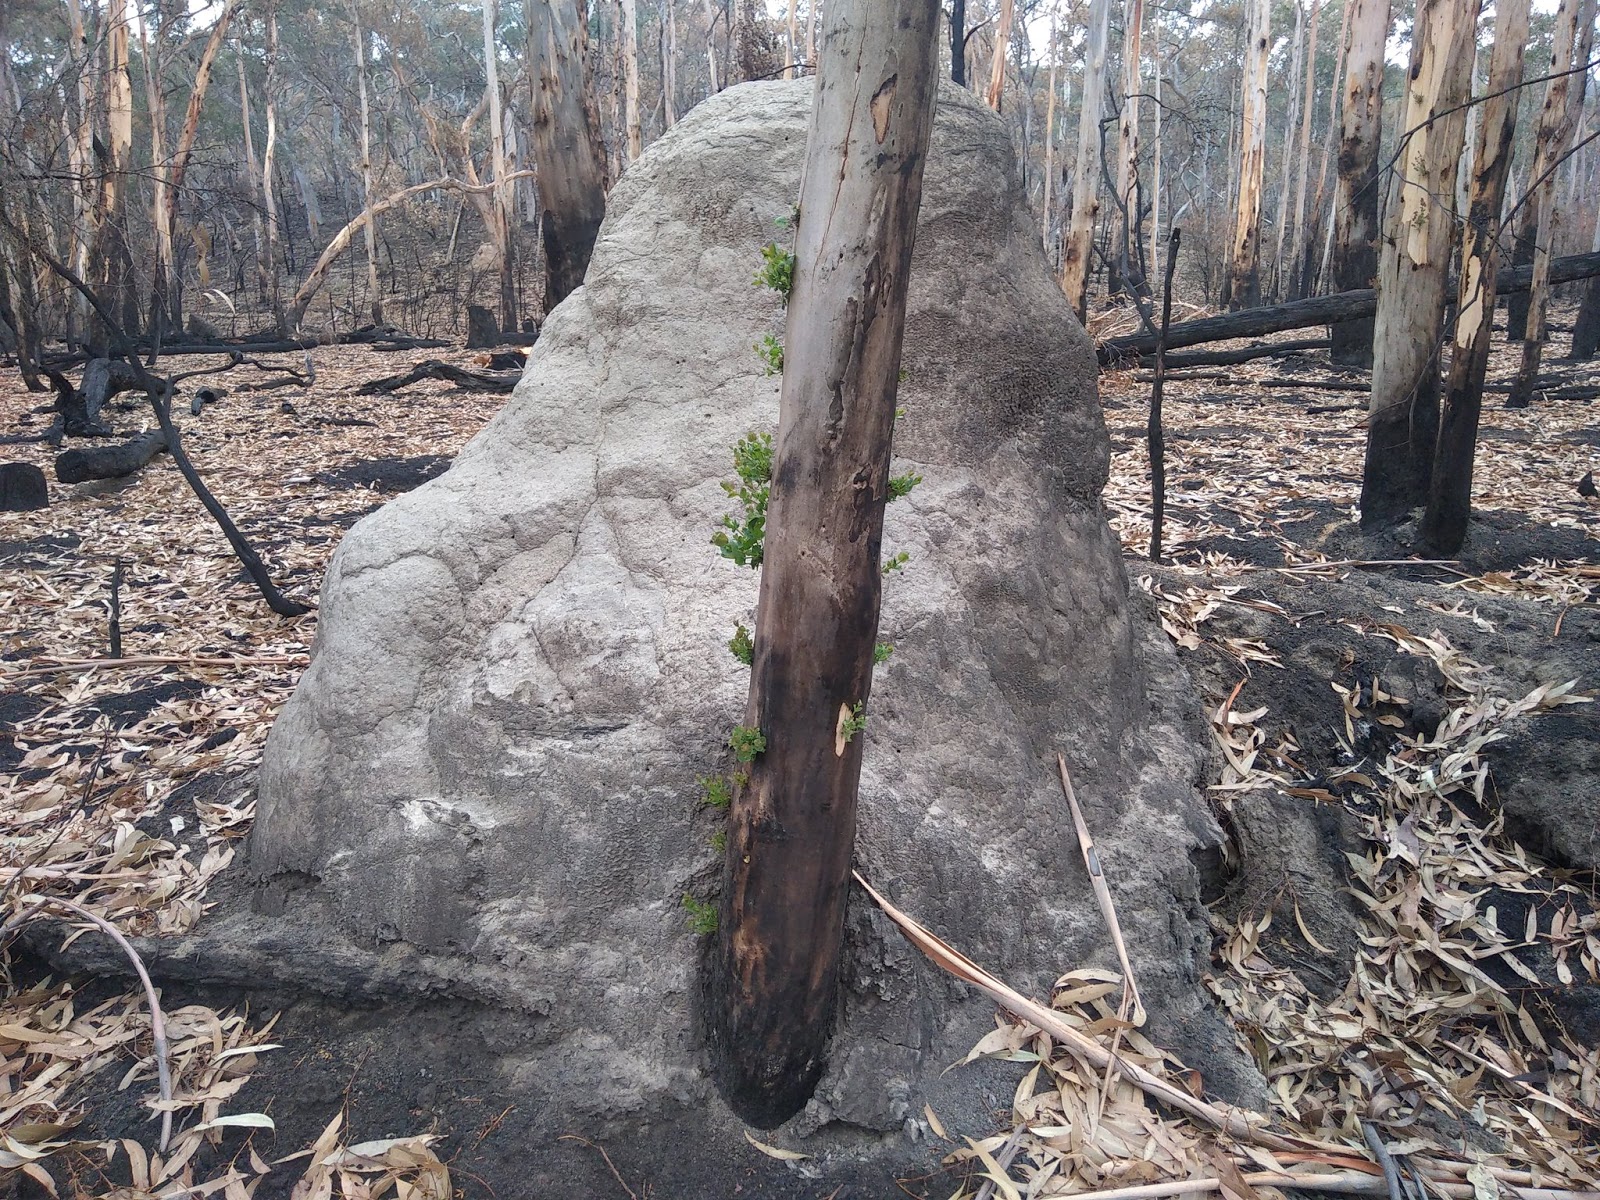 Heartwarming Pictures Of Plants Regrowing In Australia In Regions Devastated By The Blaze